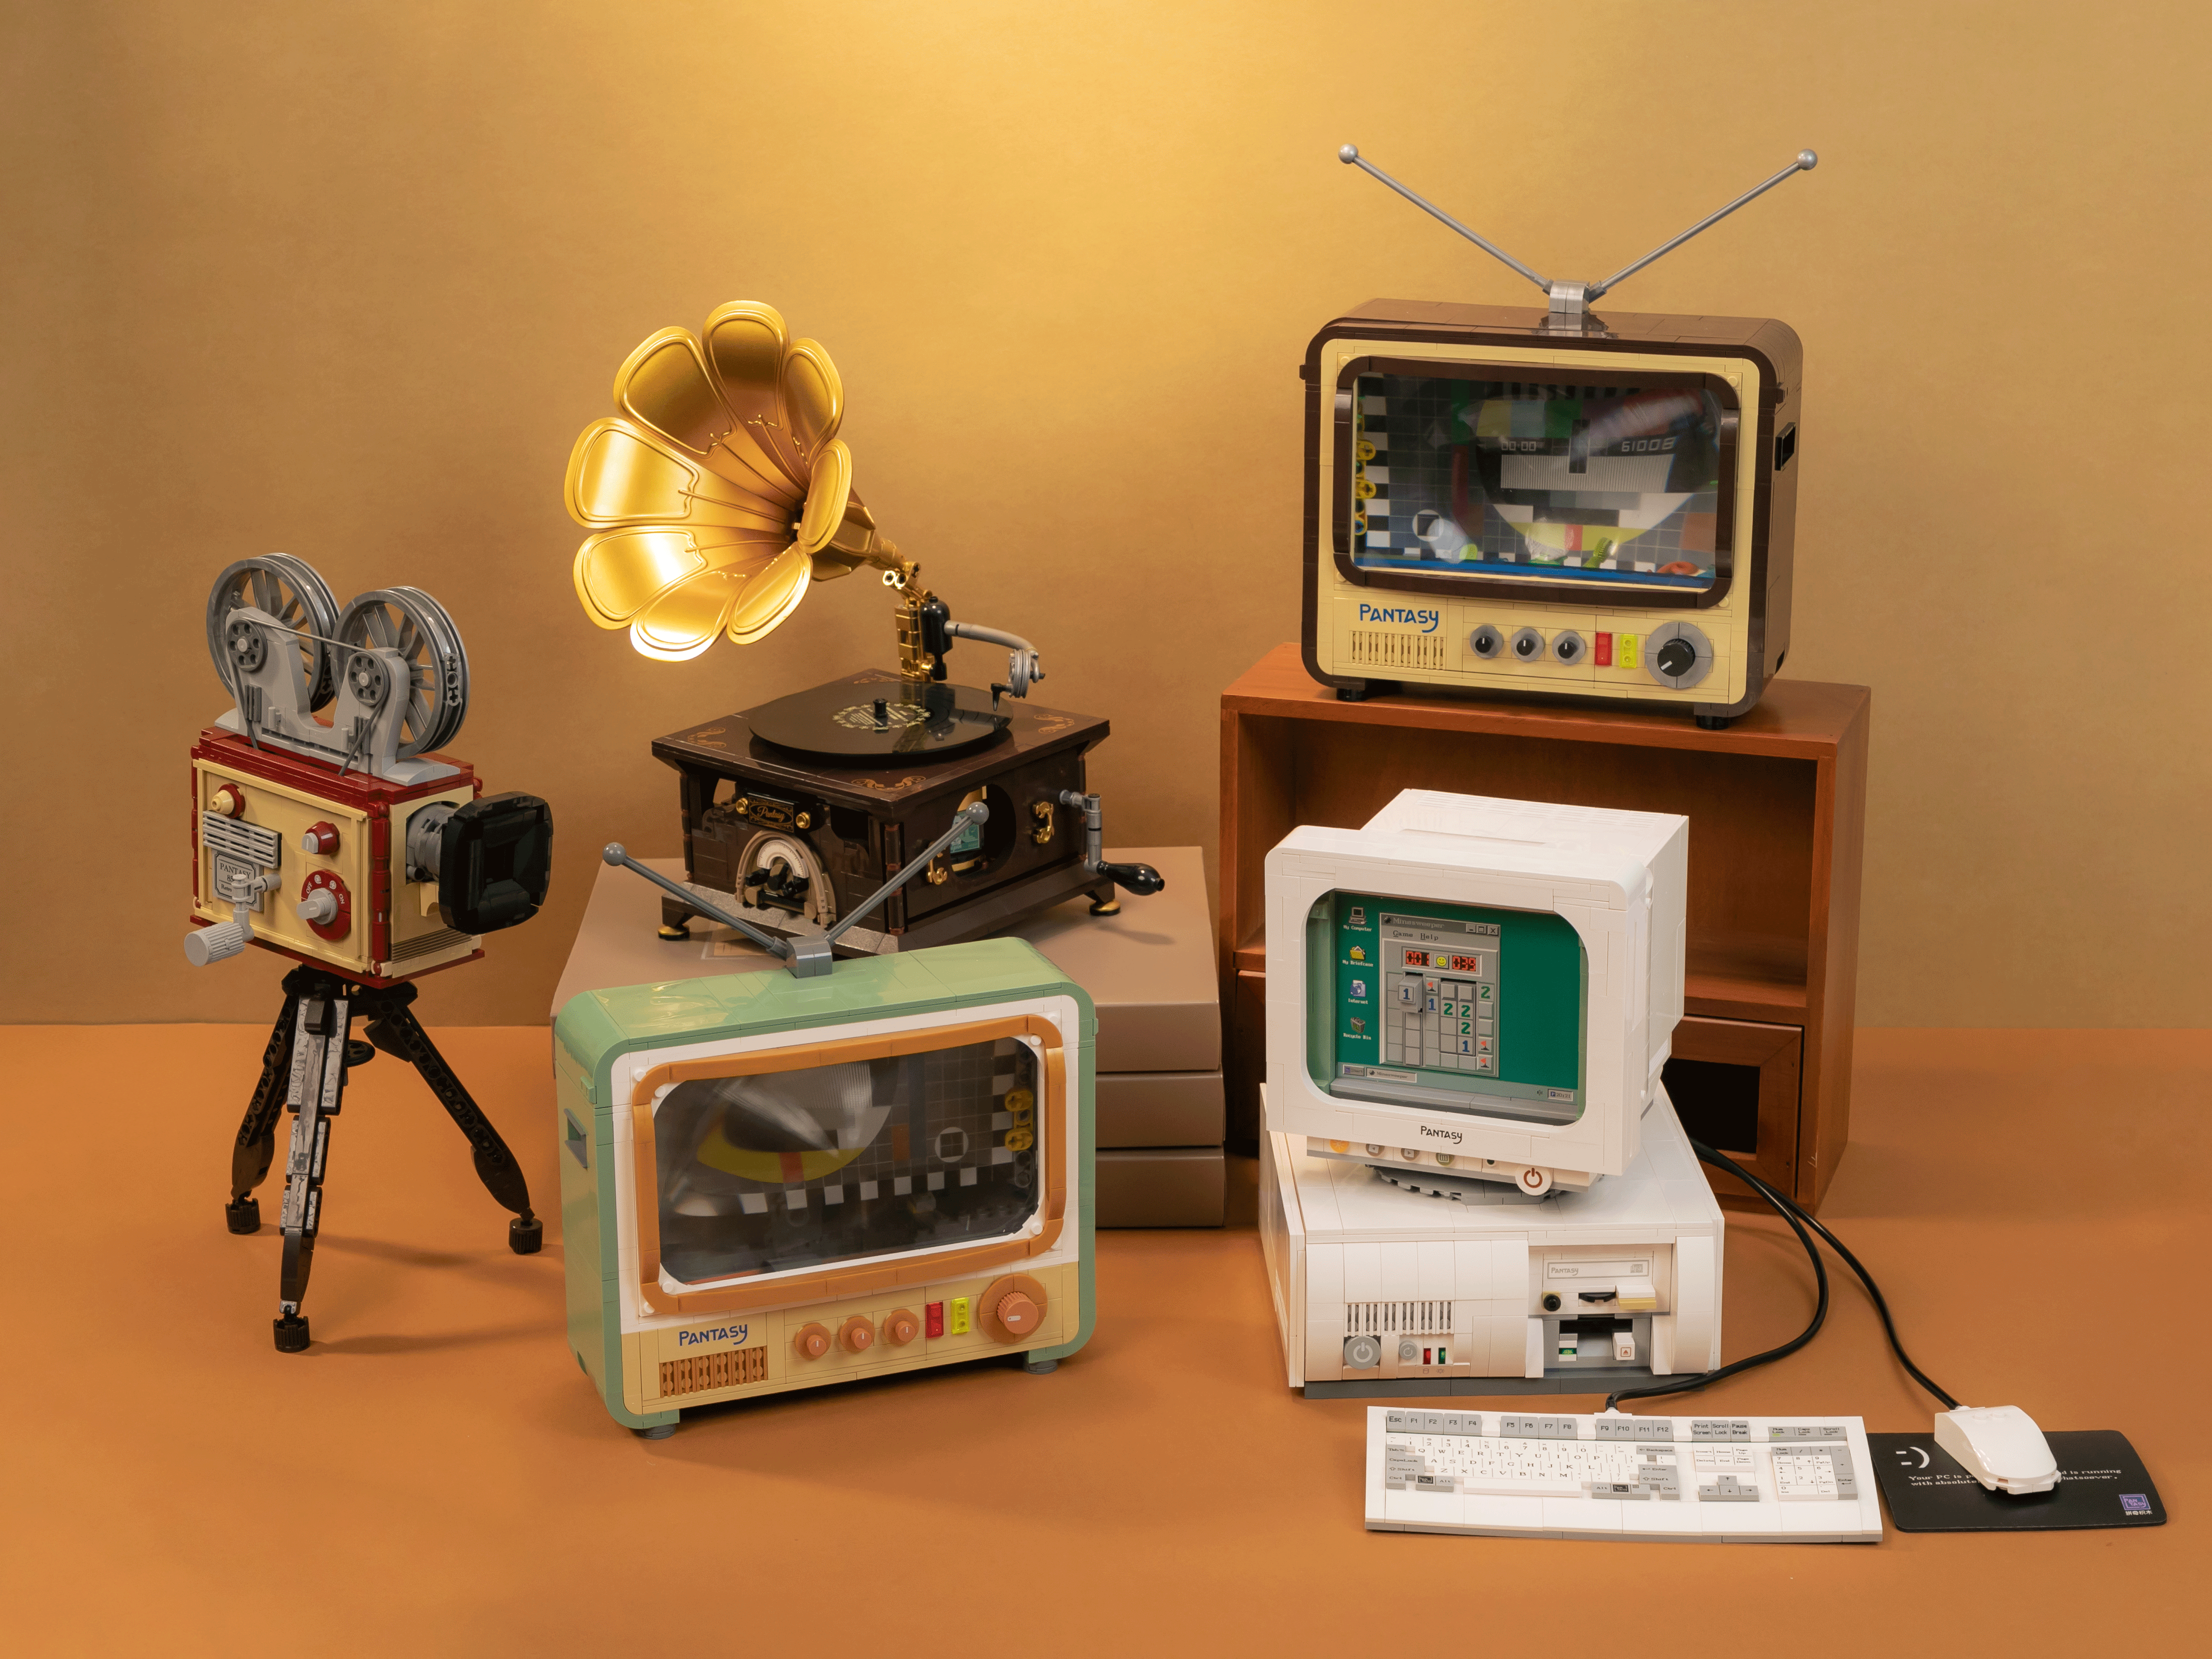 Retro Collection丨Bringing Back  Warm Memories of the Good Old Days with Objects from the Past